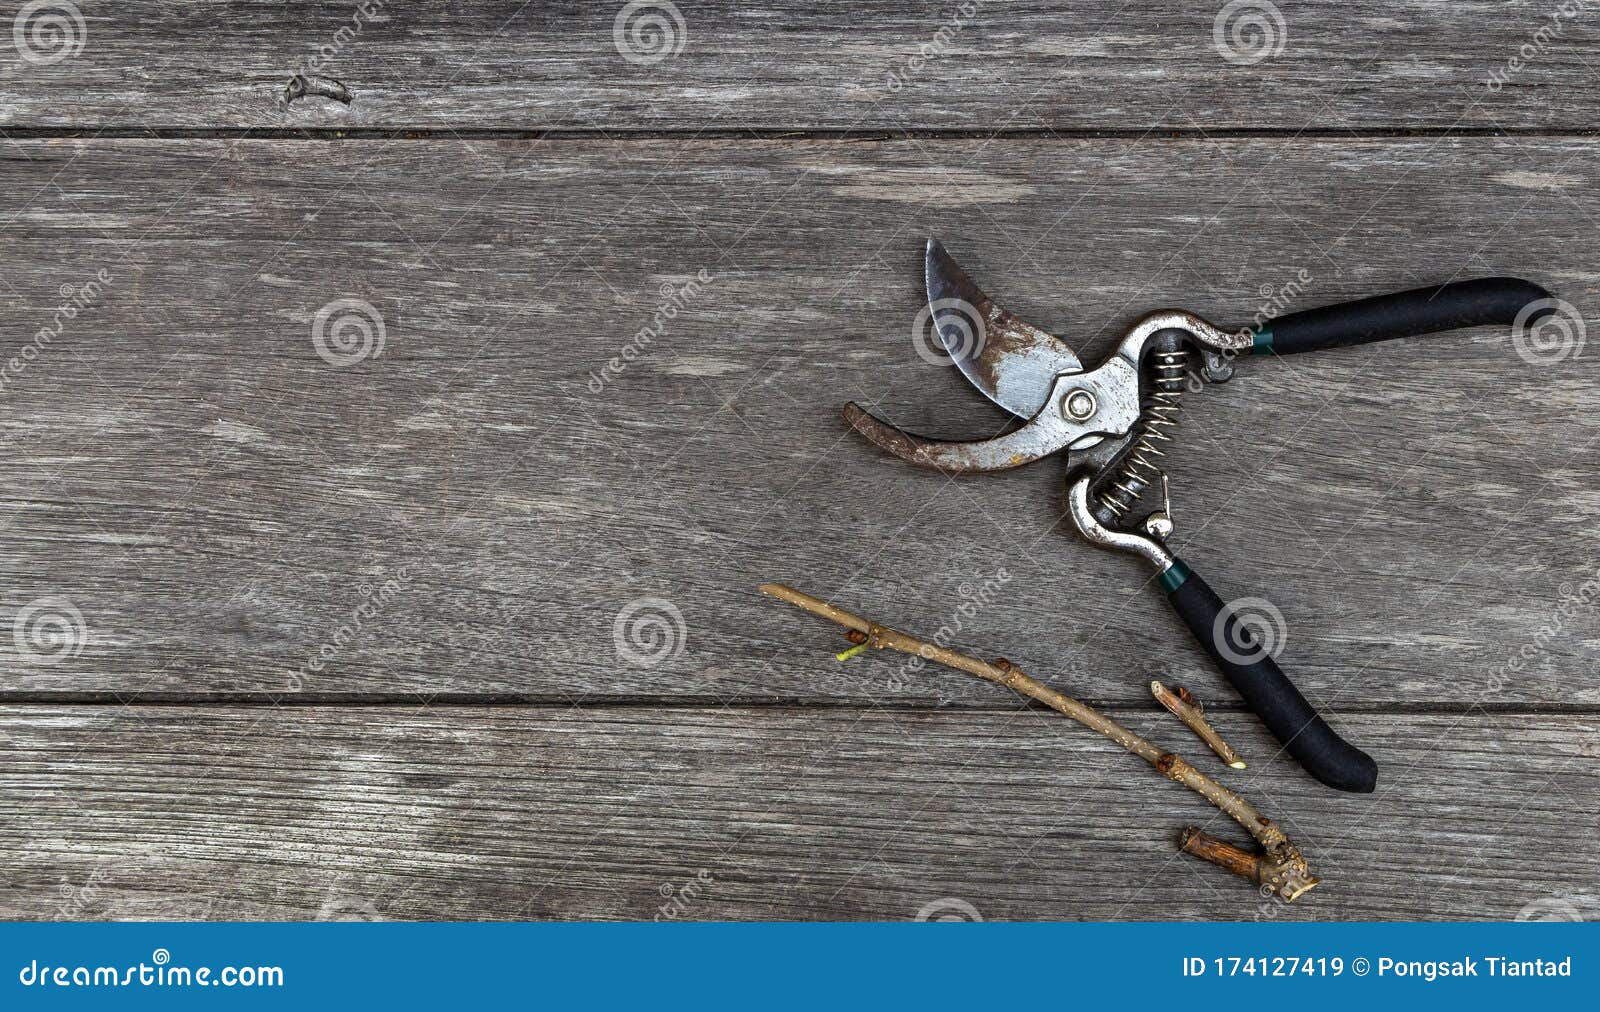 old pruning shears and branch  on wood table background wiht copy space for your text or image